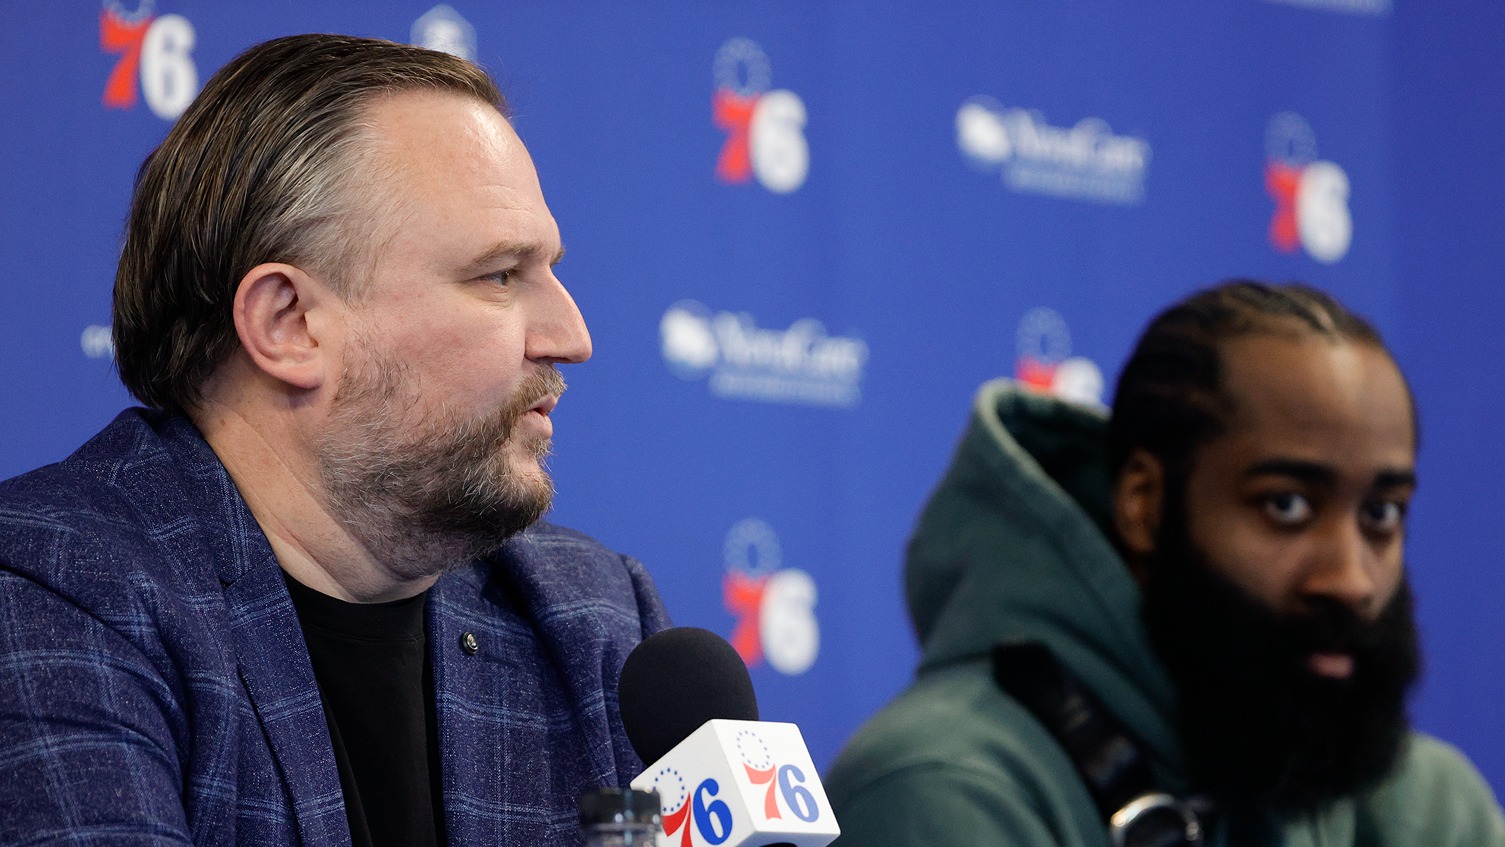 NBA Opens Investigation Into Sixers' Free Agency, James Harden's Pay Cut, Per Report